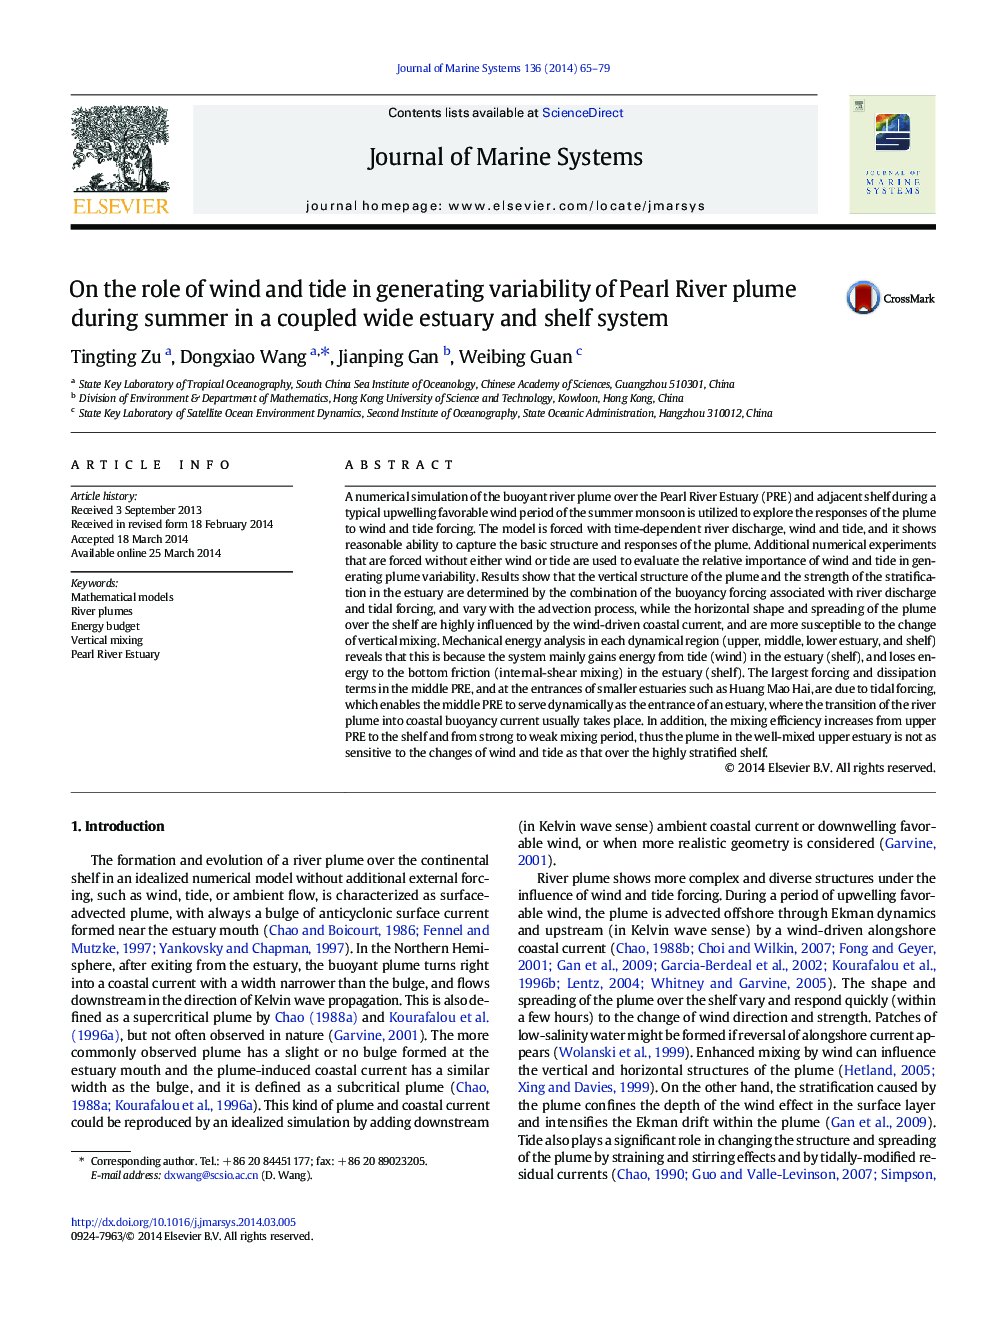 On the role of wind and tide in generating variability of Pearl River plume during summer in a coupled wide estuary and shelf system